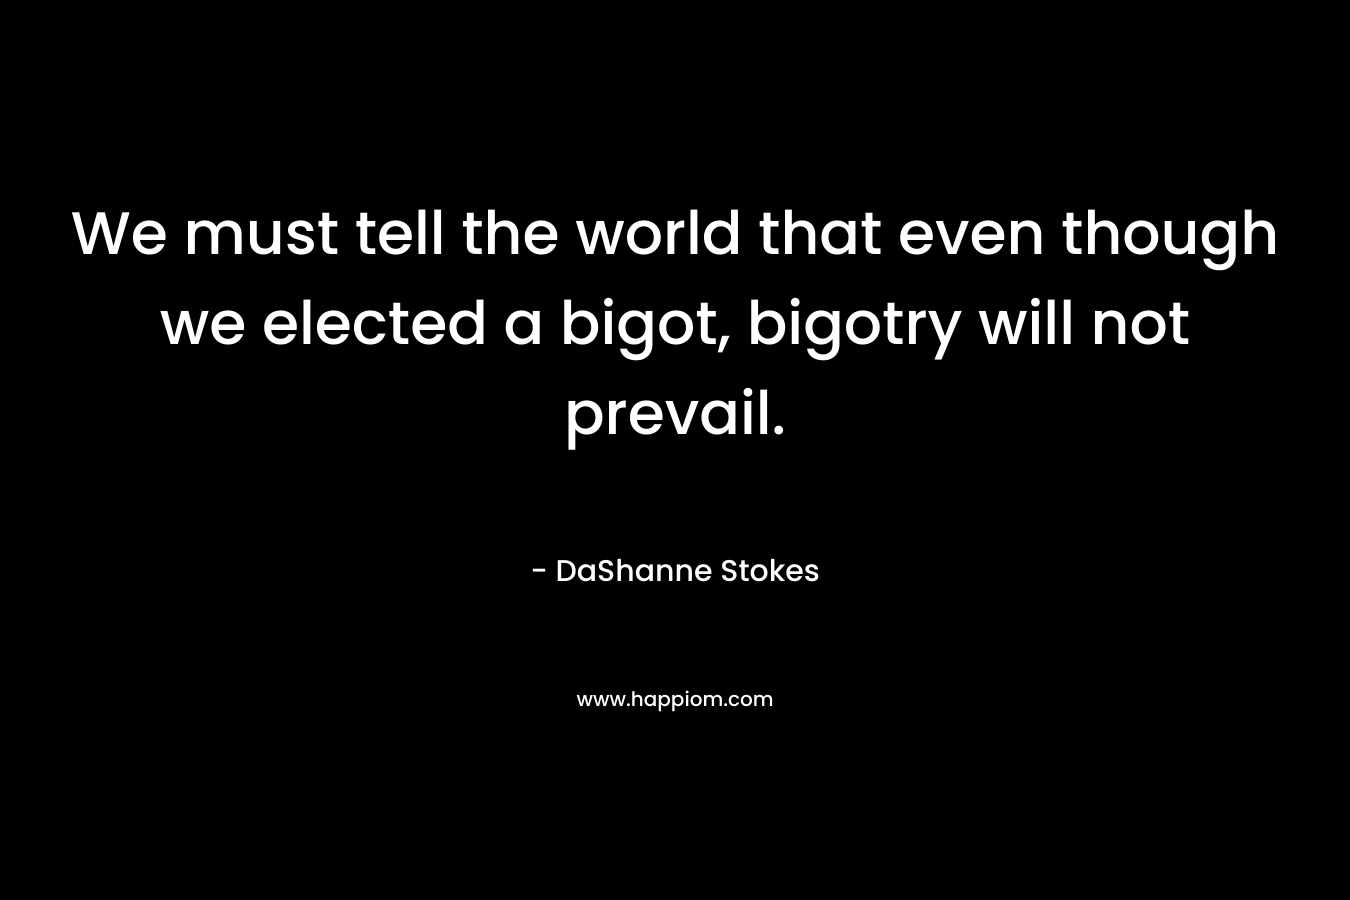 We must tell the world that even though we elected a bigot, bigotry will not prevail. – DaShanne Stokes